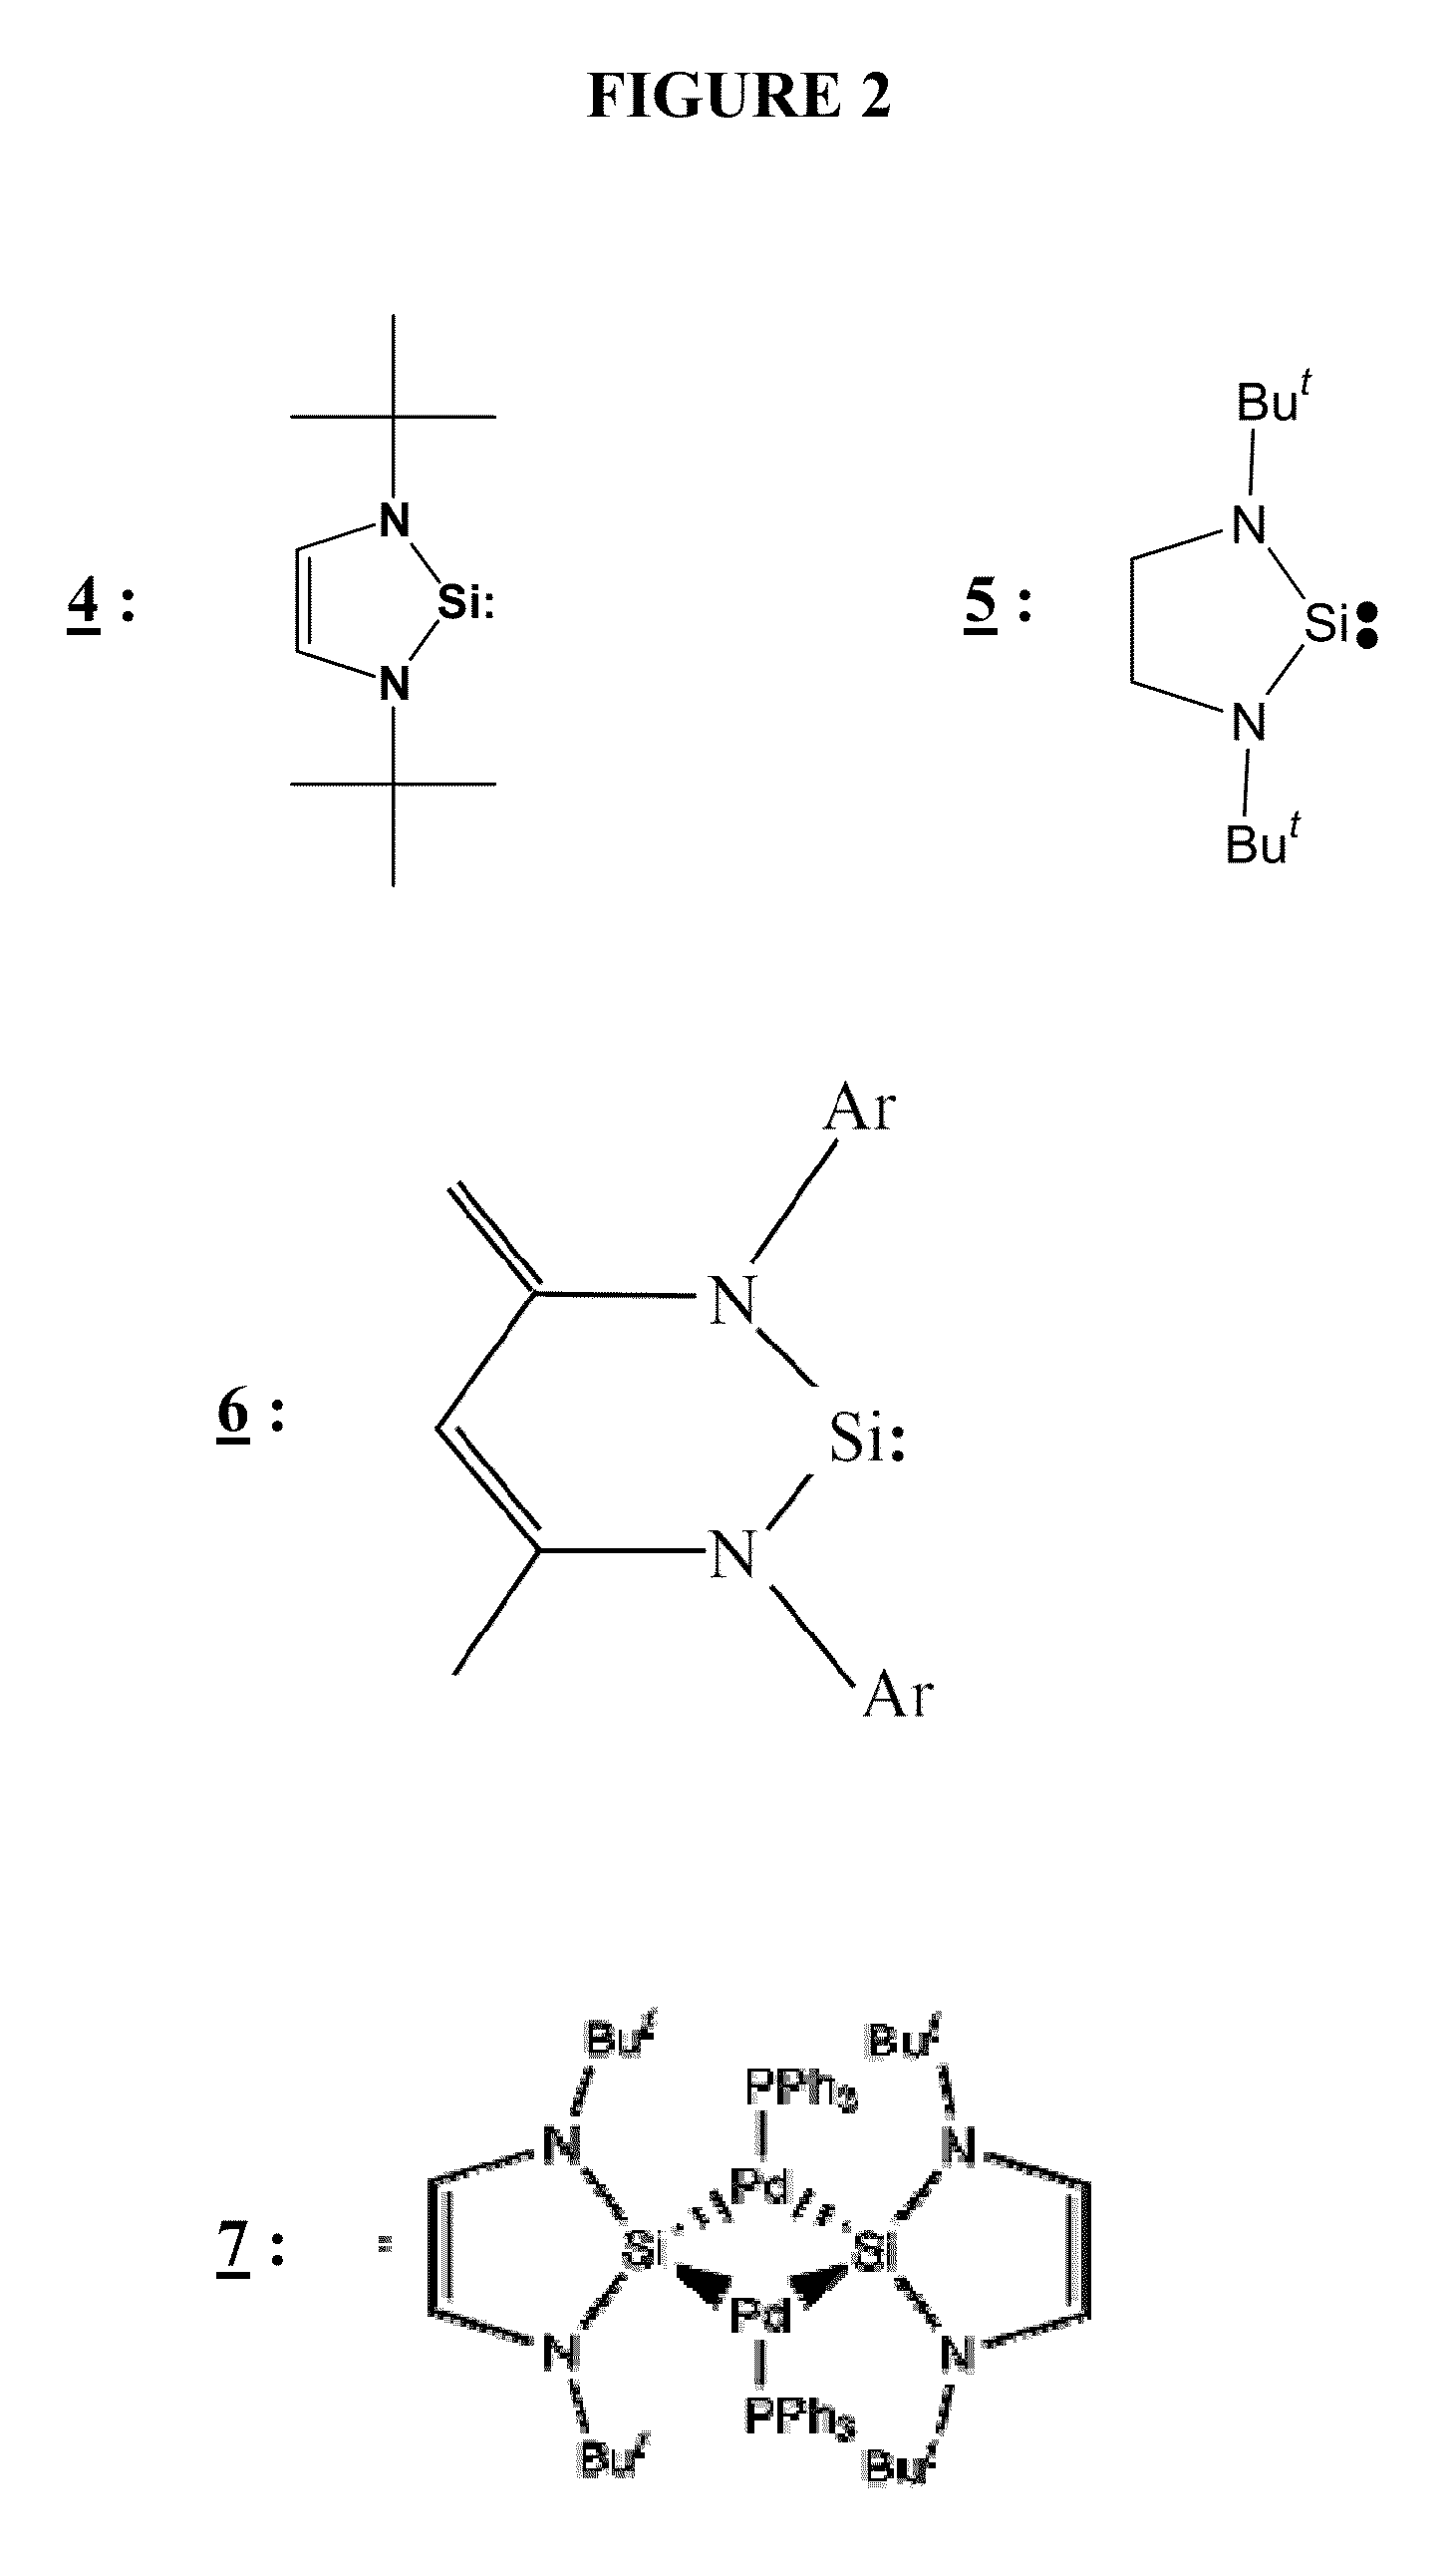 Methods of Polymerizing Silanes and Cyclosilanes Using N-Heterocyclic Carbenes, Metal Complexes Having N-Heterocyclic Carbene Ligands, and Lanthanide Compounds